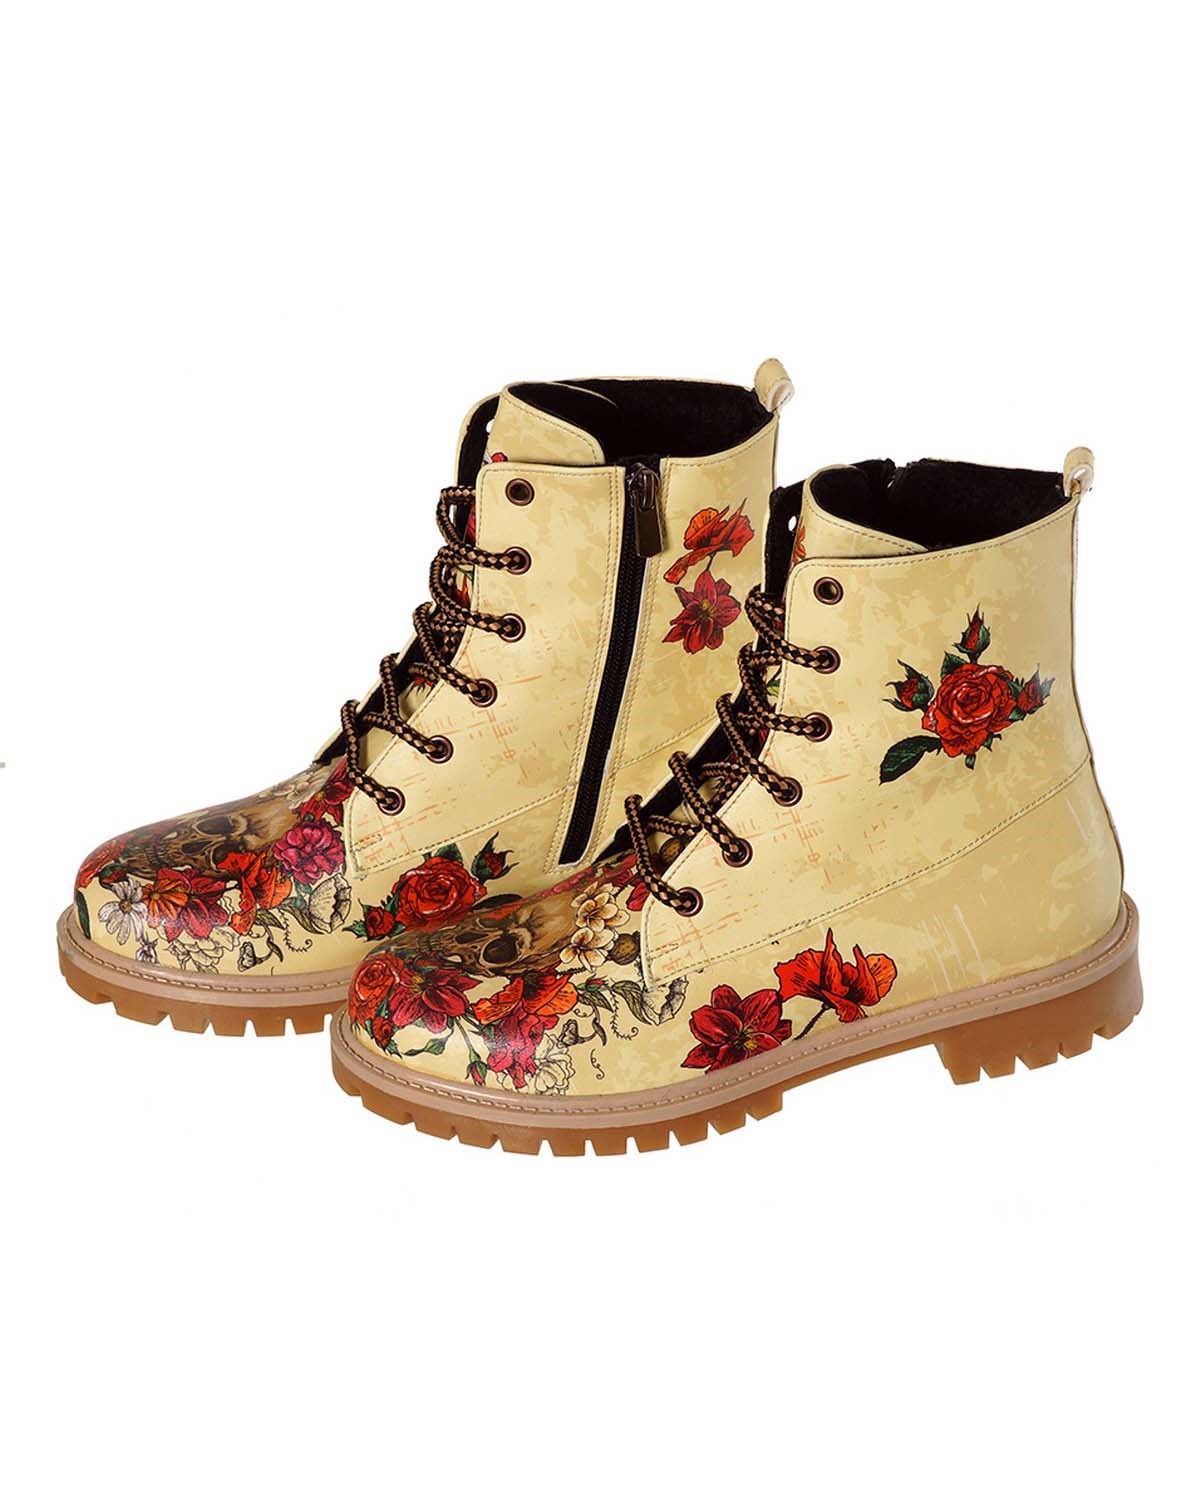 Printed Skull Pattern Lace-Up Women's Short Boots